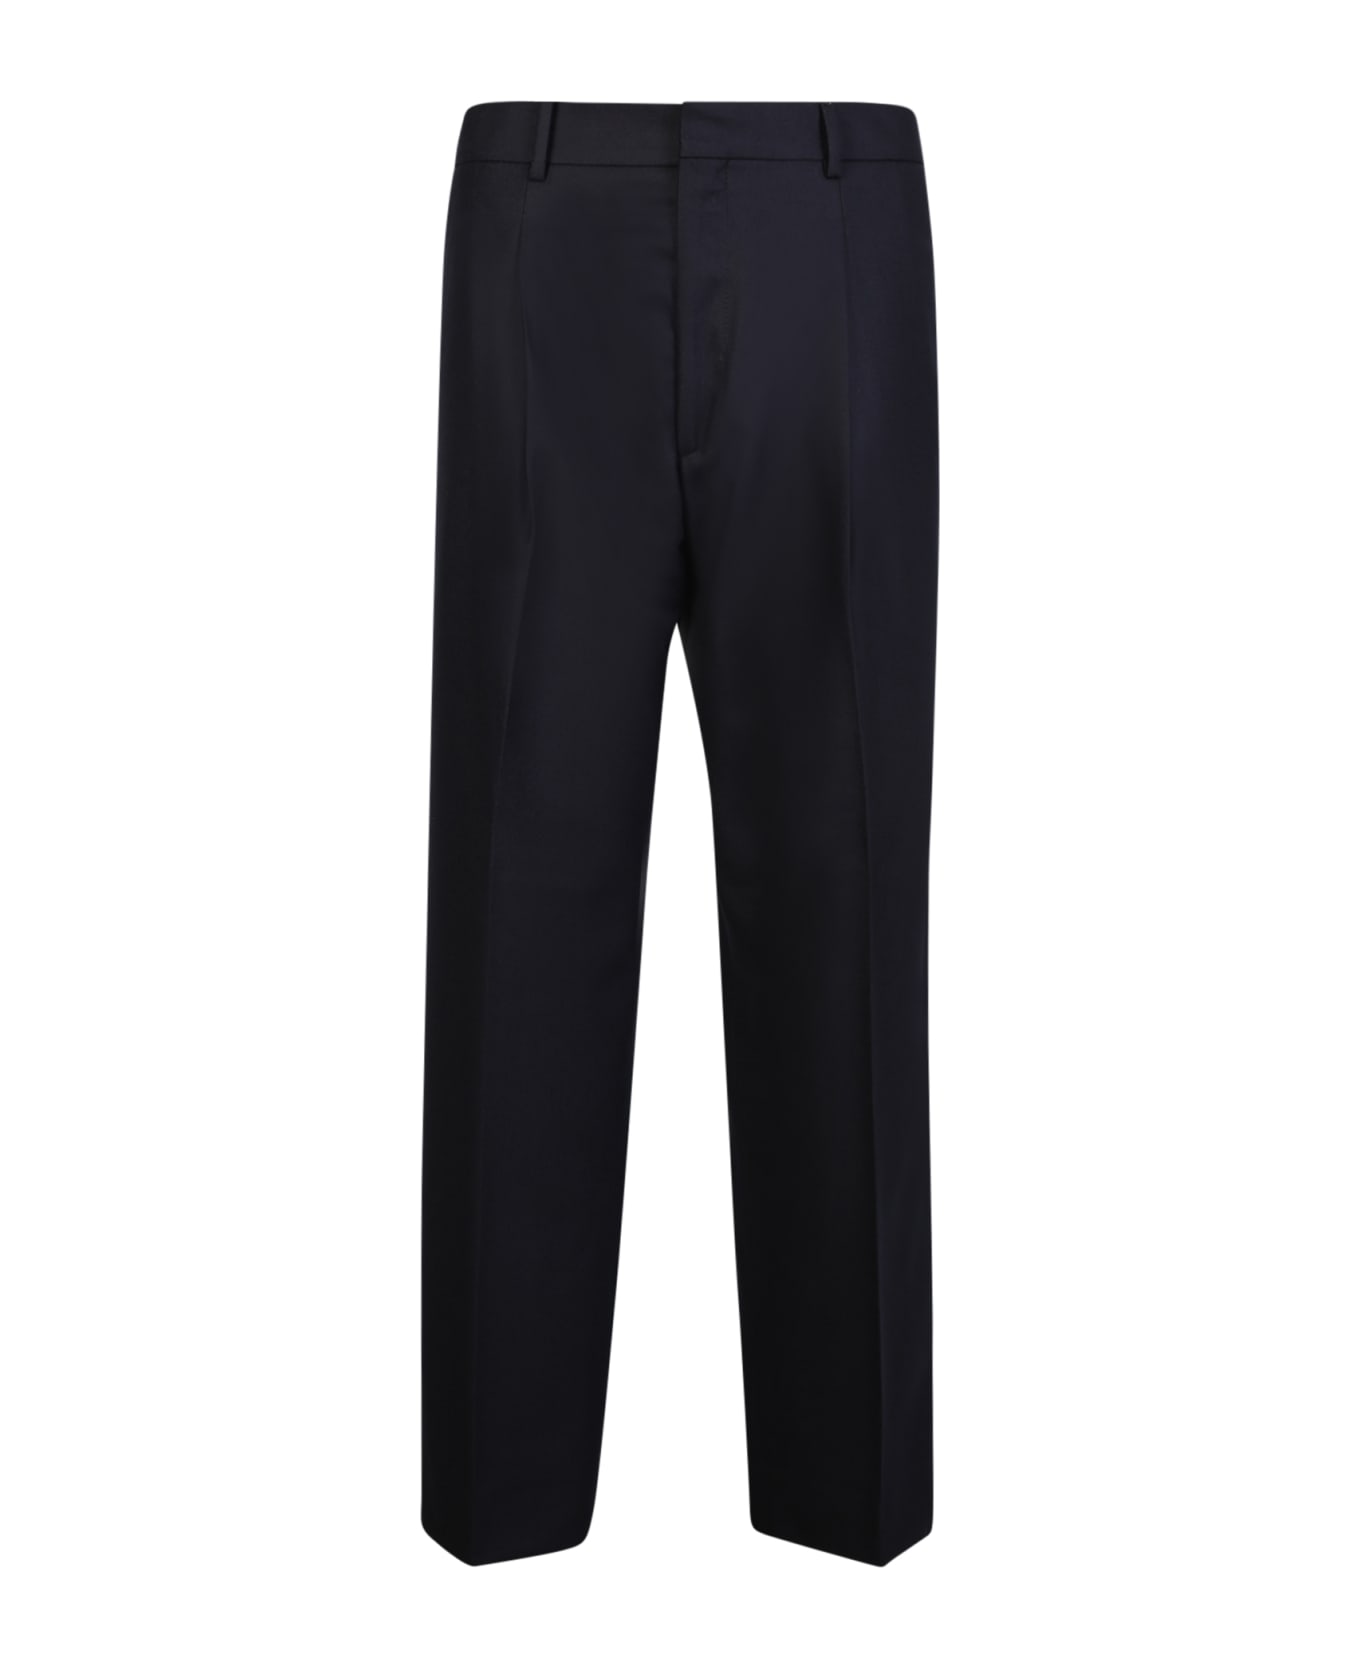 costumein Vincent 1 Pince Trousers In Black - Black ボトムス